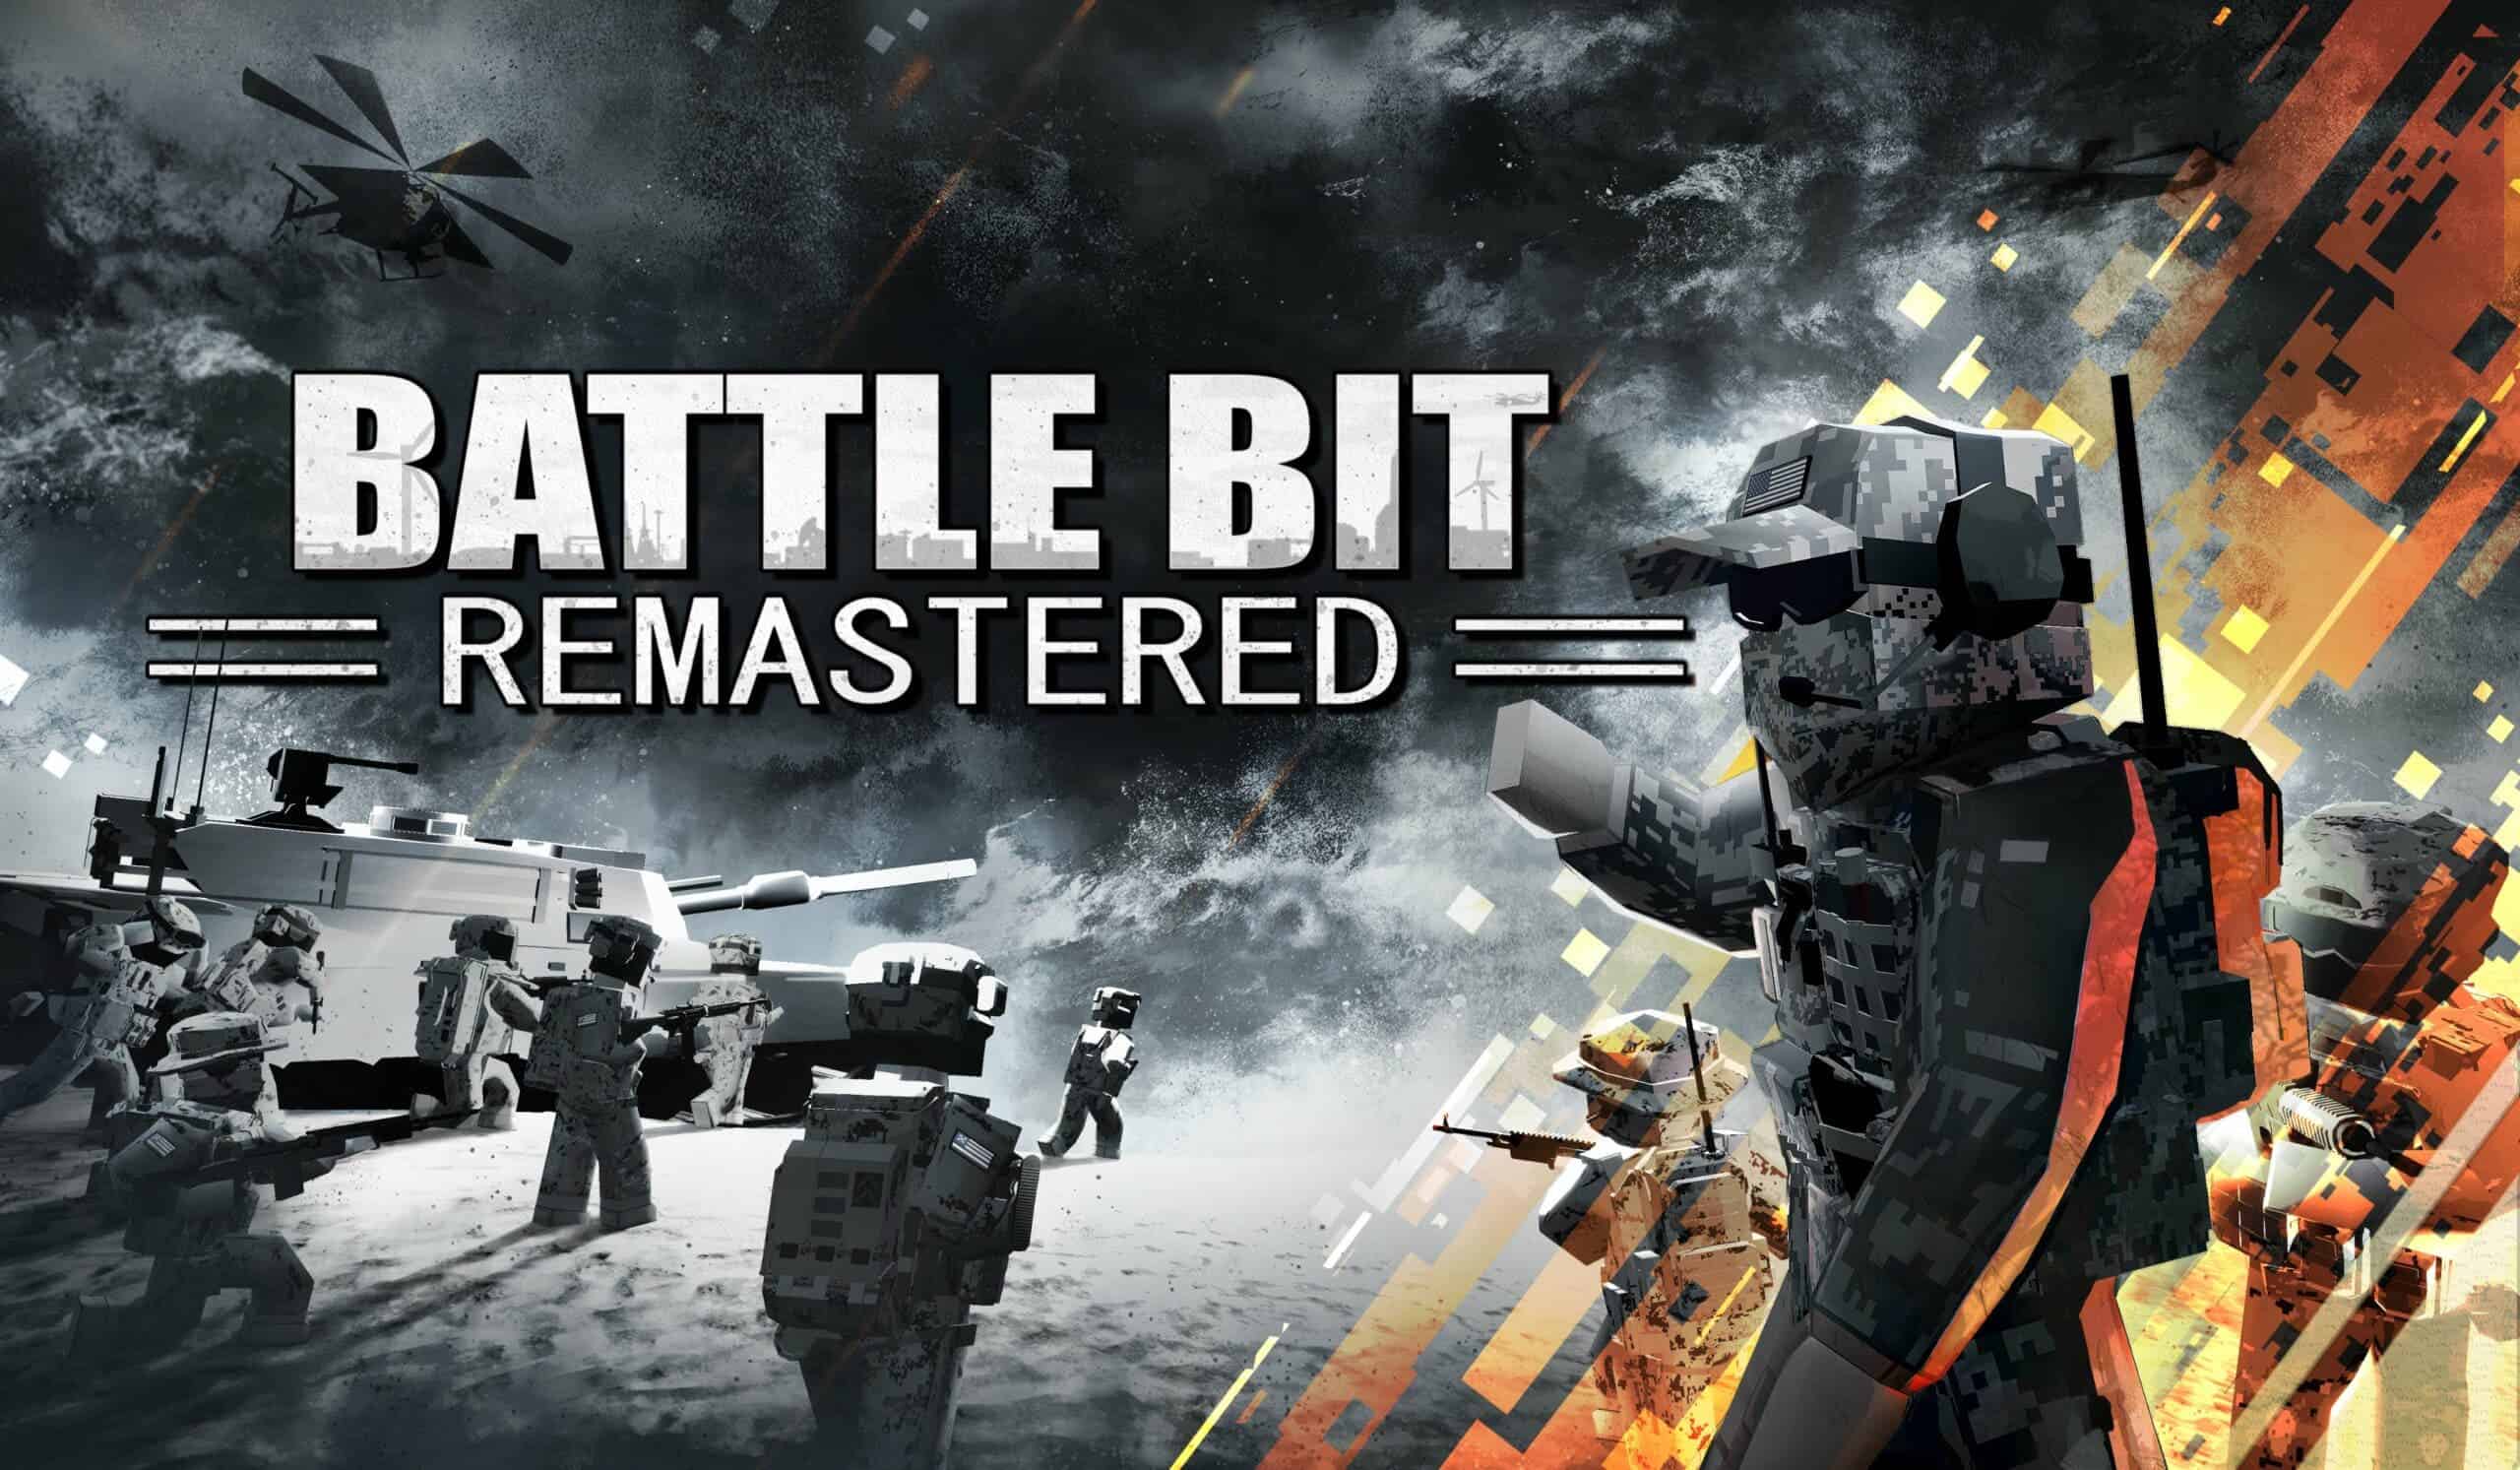 What would you like to see in Battlebit Remastered after launch